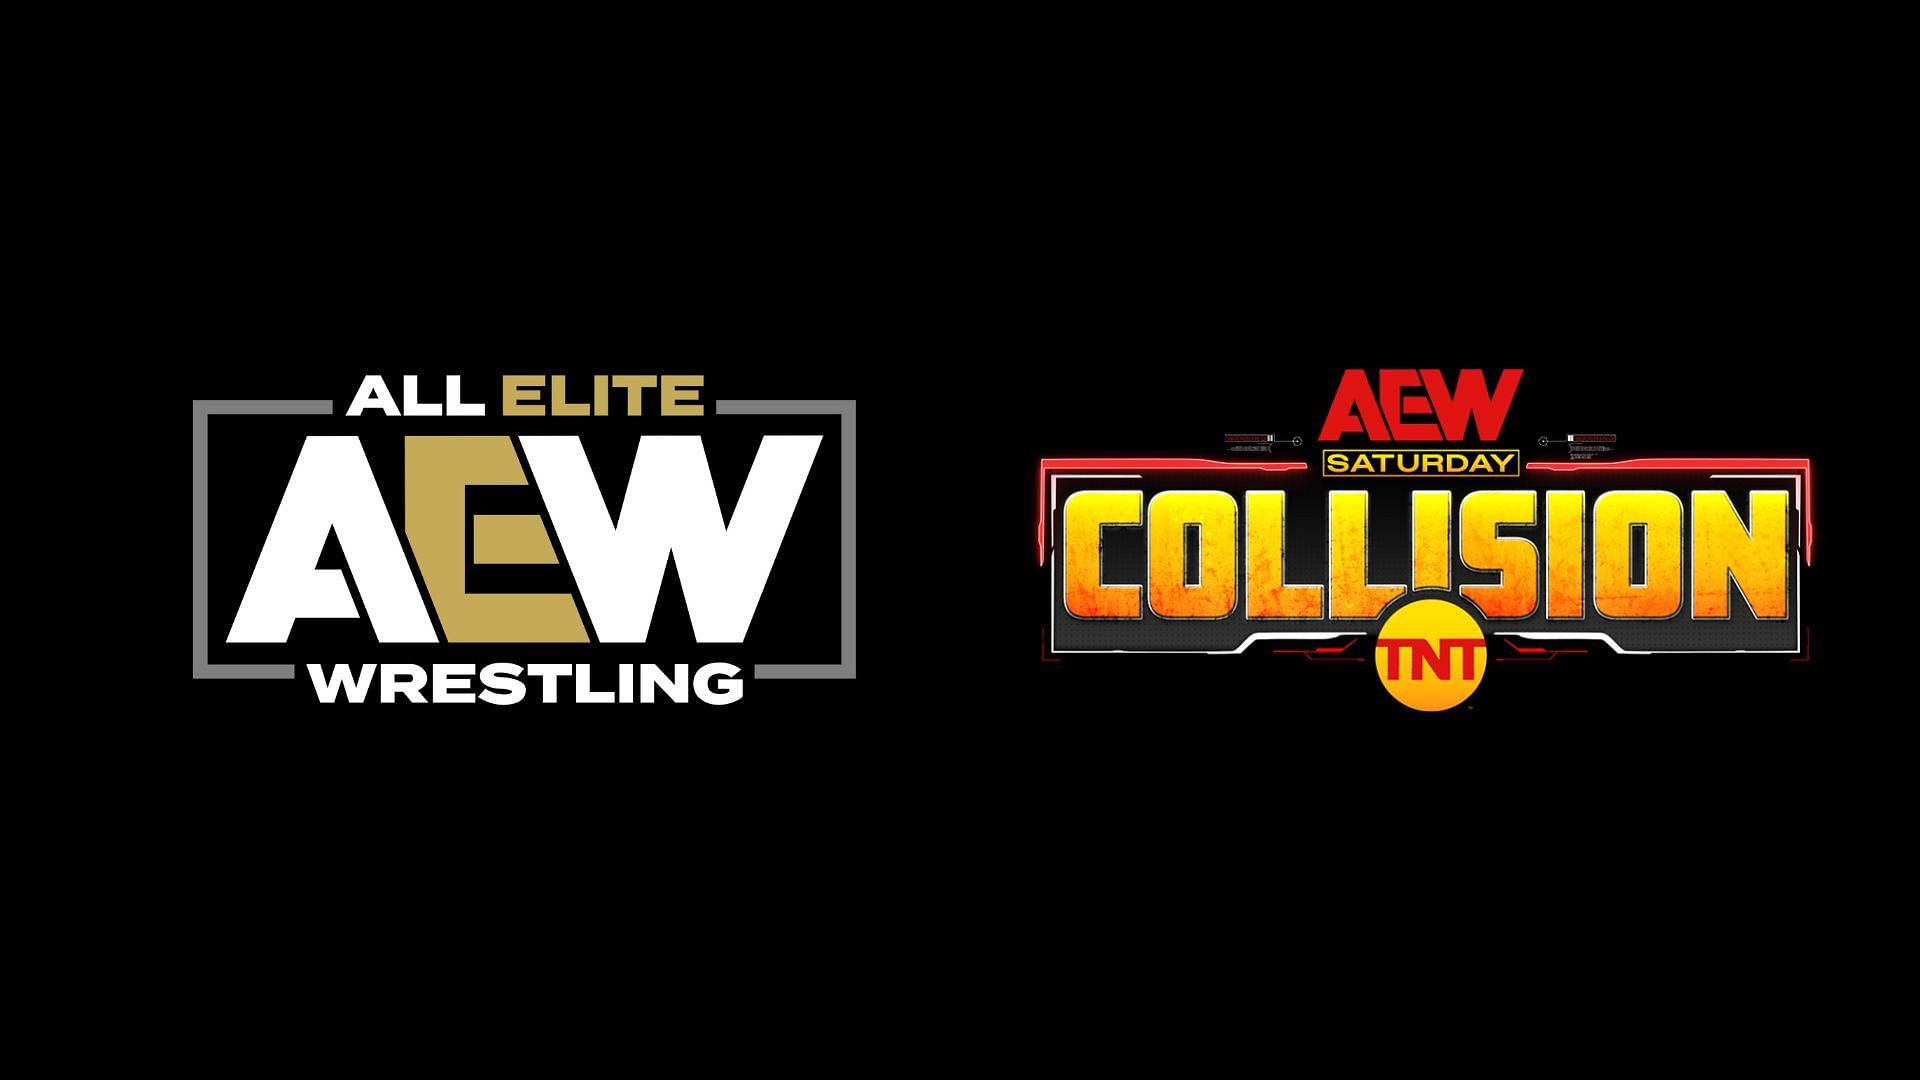 AEW Collision is the Saturday show of All Elite Wrestling